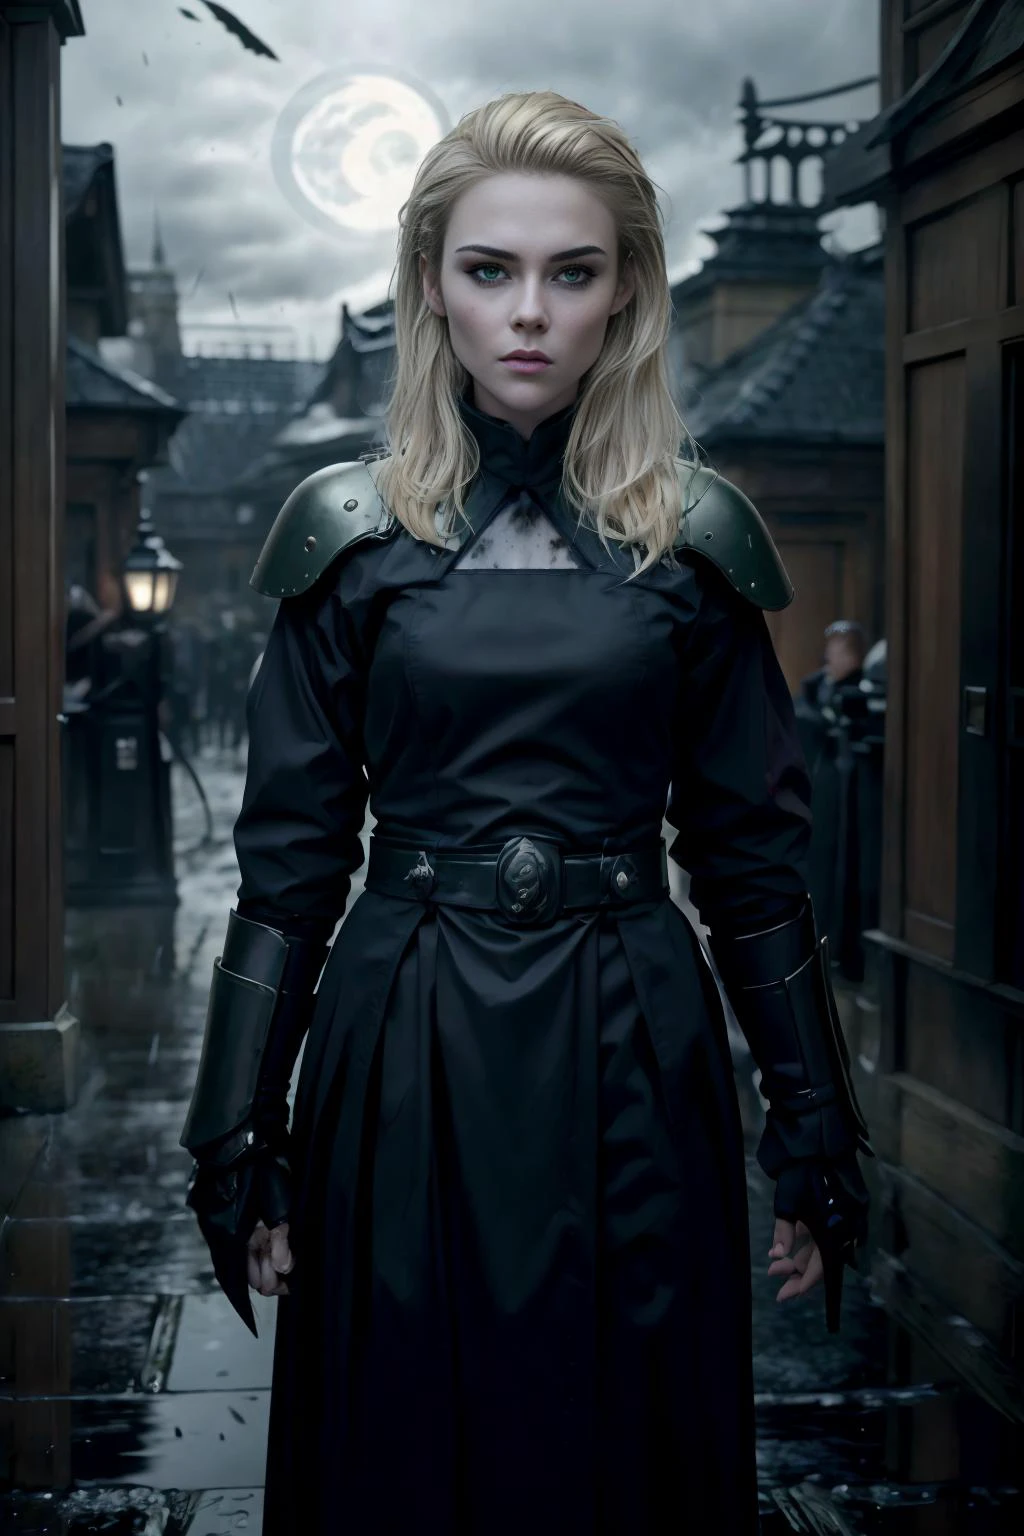 Horror-themed, wide angle, an epic cinematic photo of (opt-rachaeltaylor blonde hair, green eyes) in a legendary armor with perfect hands female samurai style, Eerie, unsettling, dark, spooky, suspenseful, grim, highly detailed, crowded victorian london street, (night, moonlight), wet cobblestones, fog, dramatic lighting